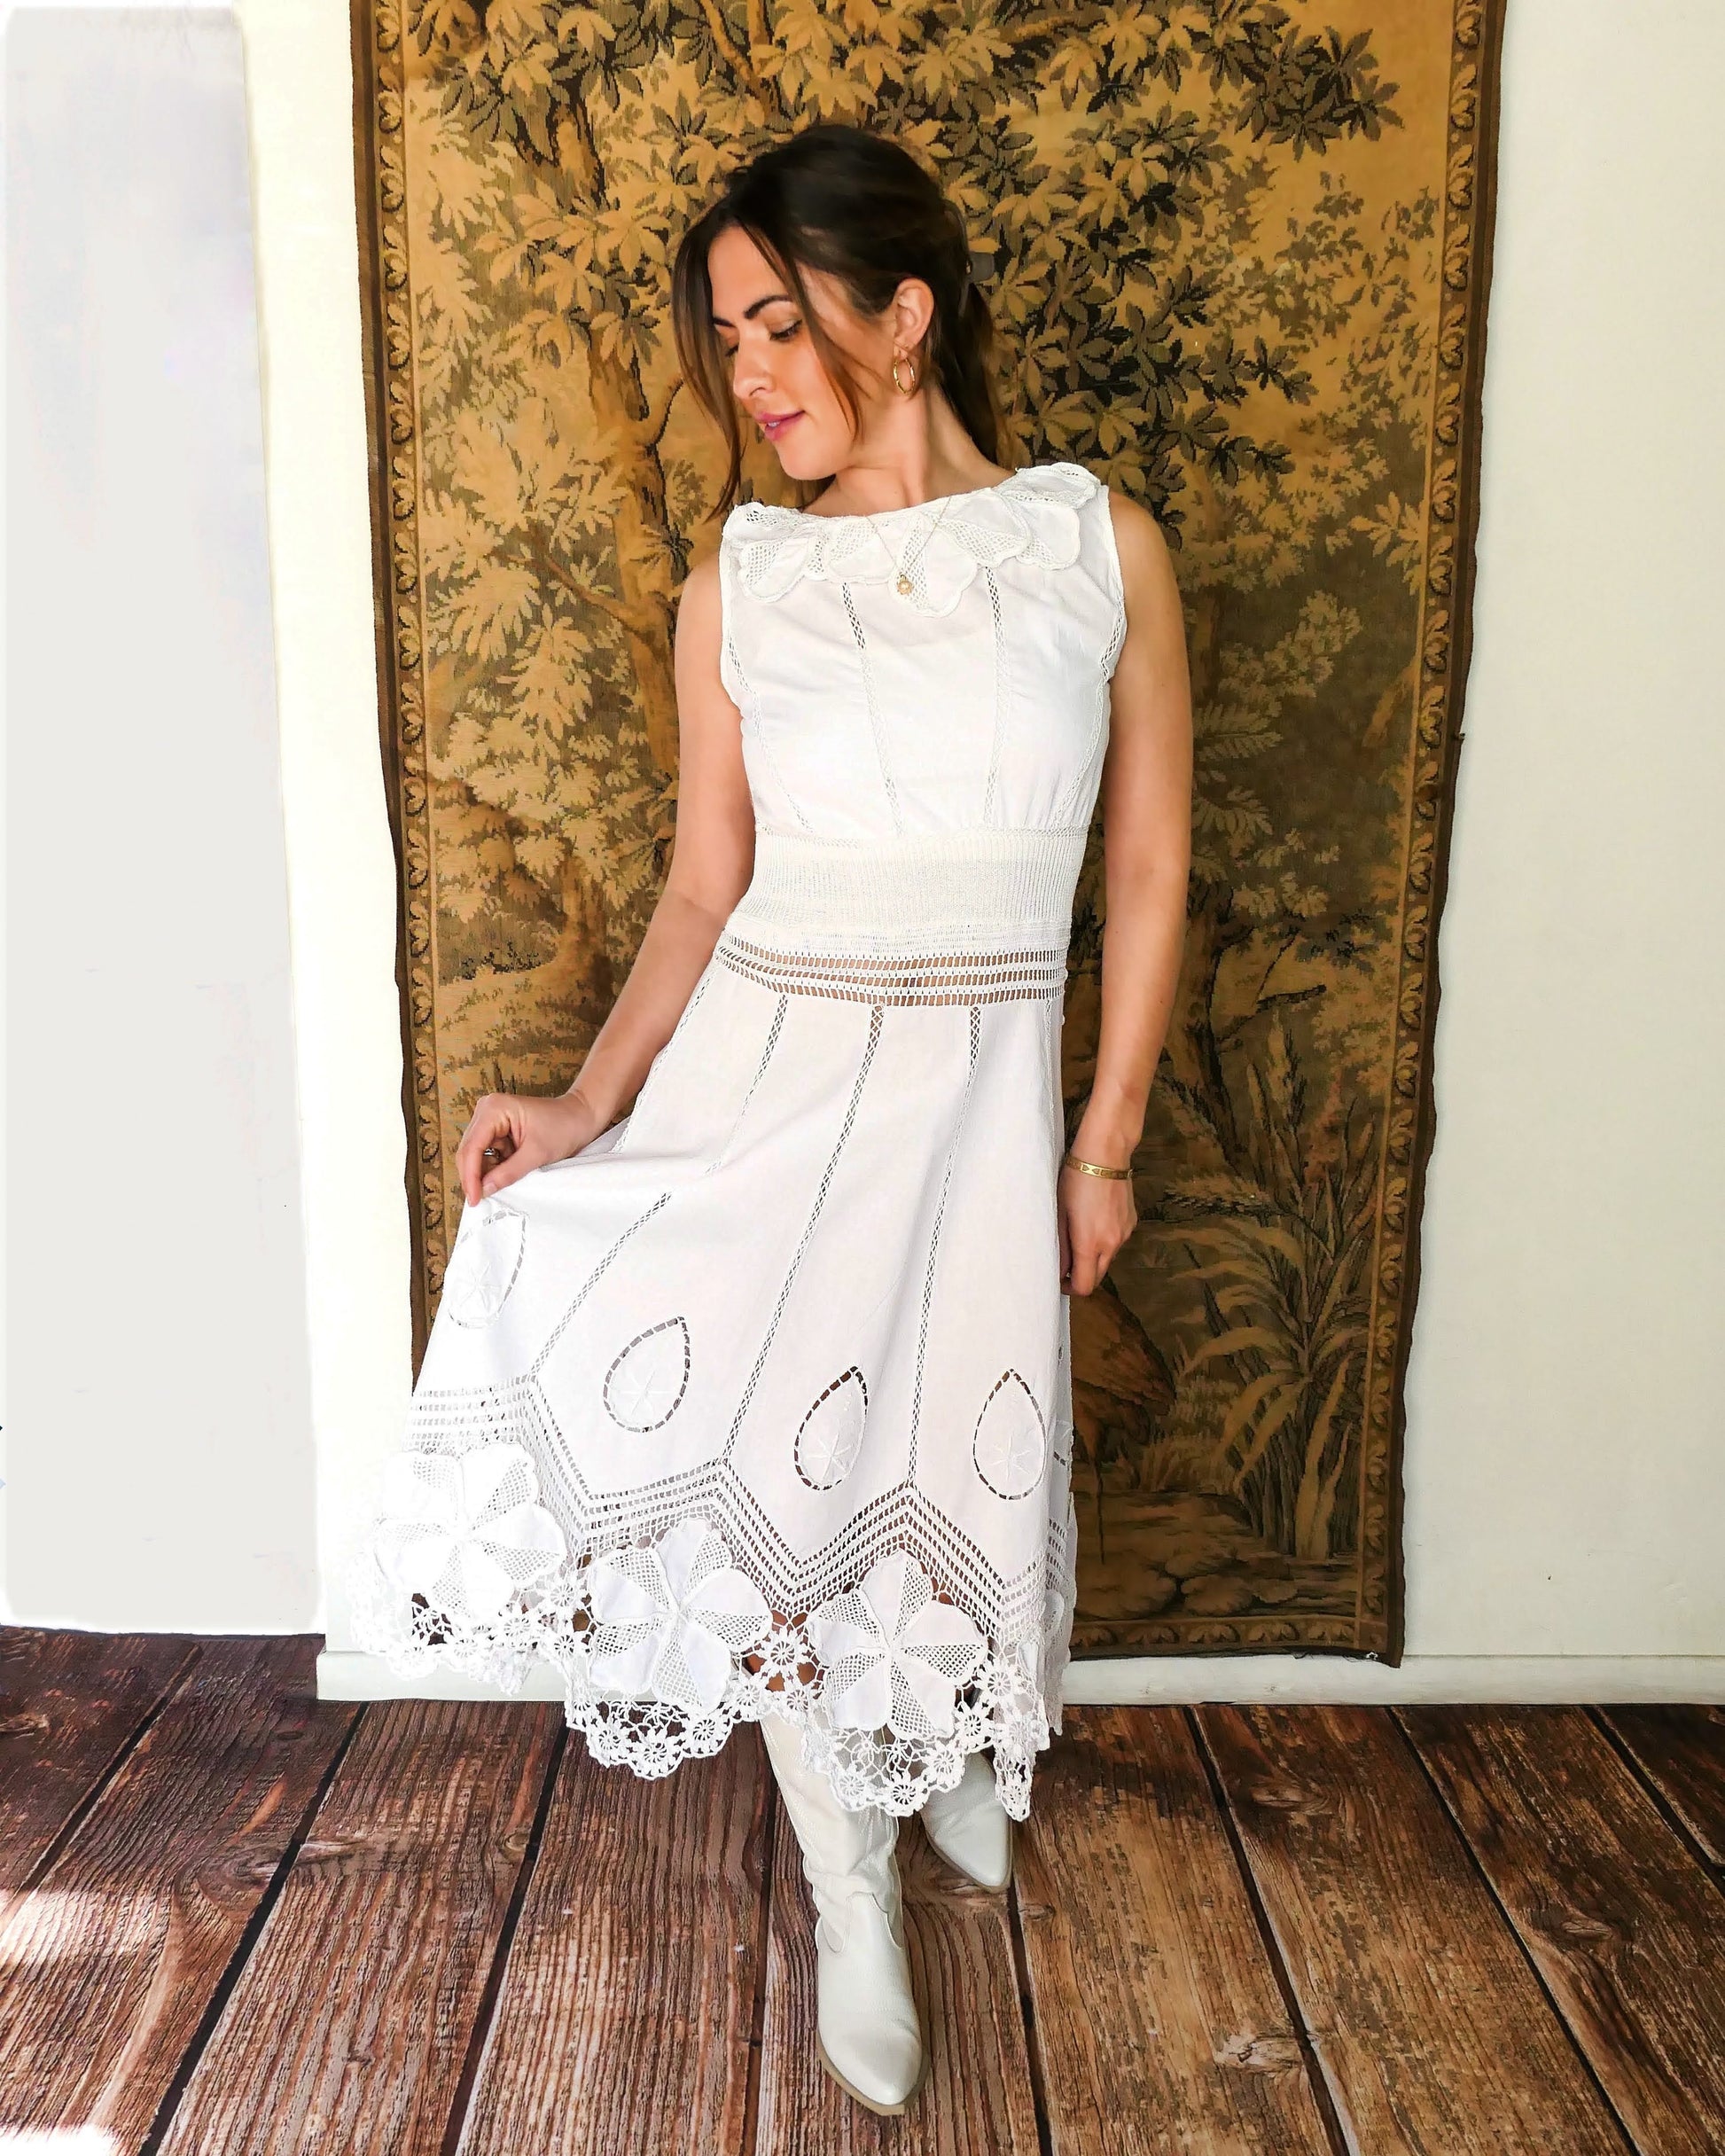 A white cotton midi dress with whimsical crochet and embroidered flowers at the hem and collar, and teardrop shaped eyelet detail on the skirt. Stretchable ribbed knit fabric around the waist adds contour to the dress.  By Lim's Vintage.